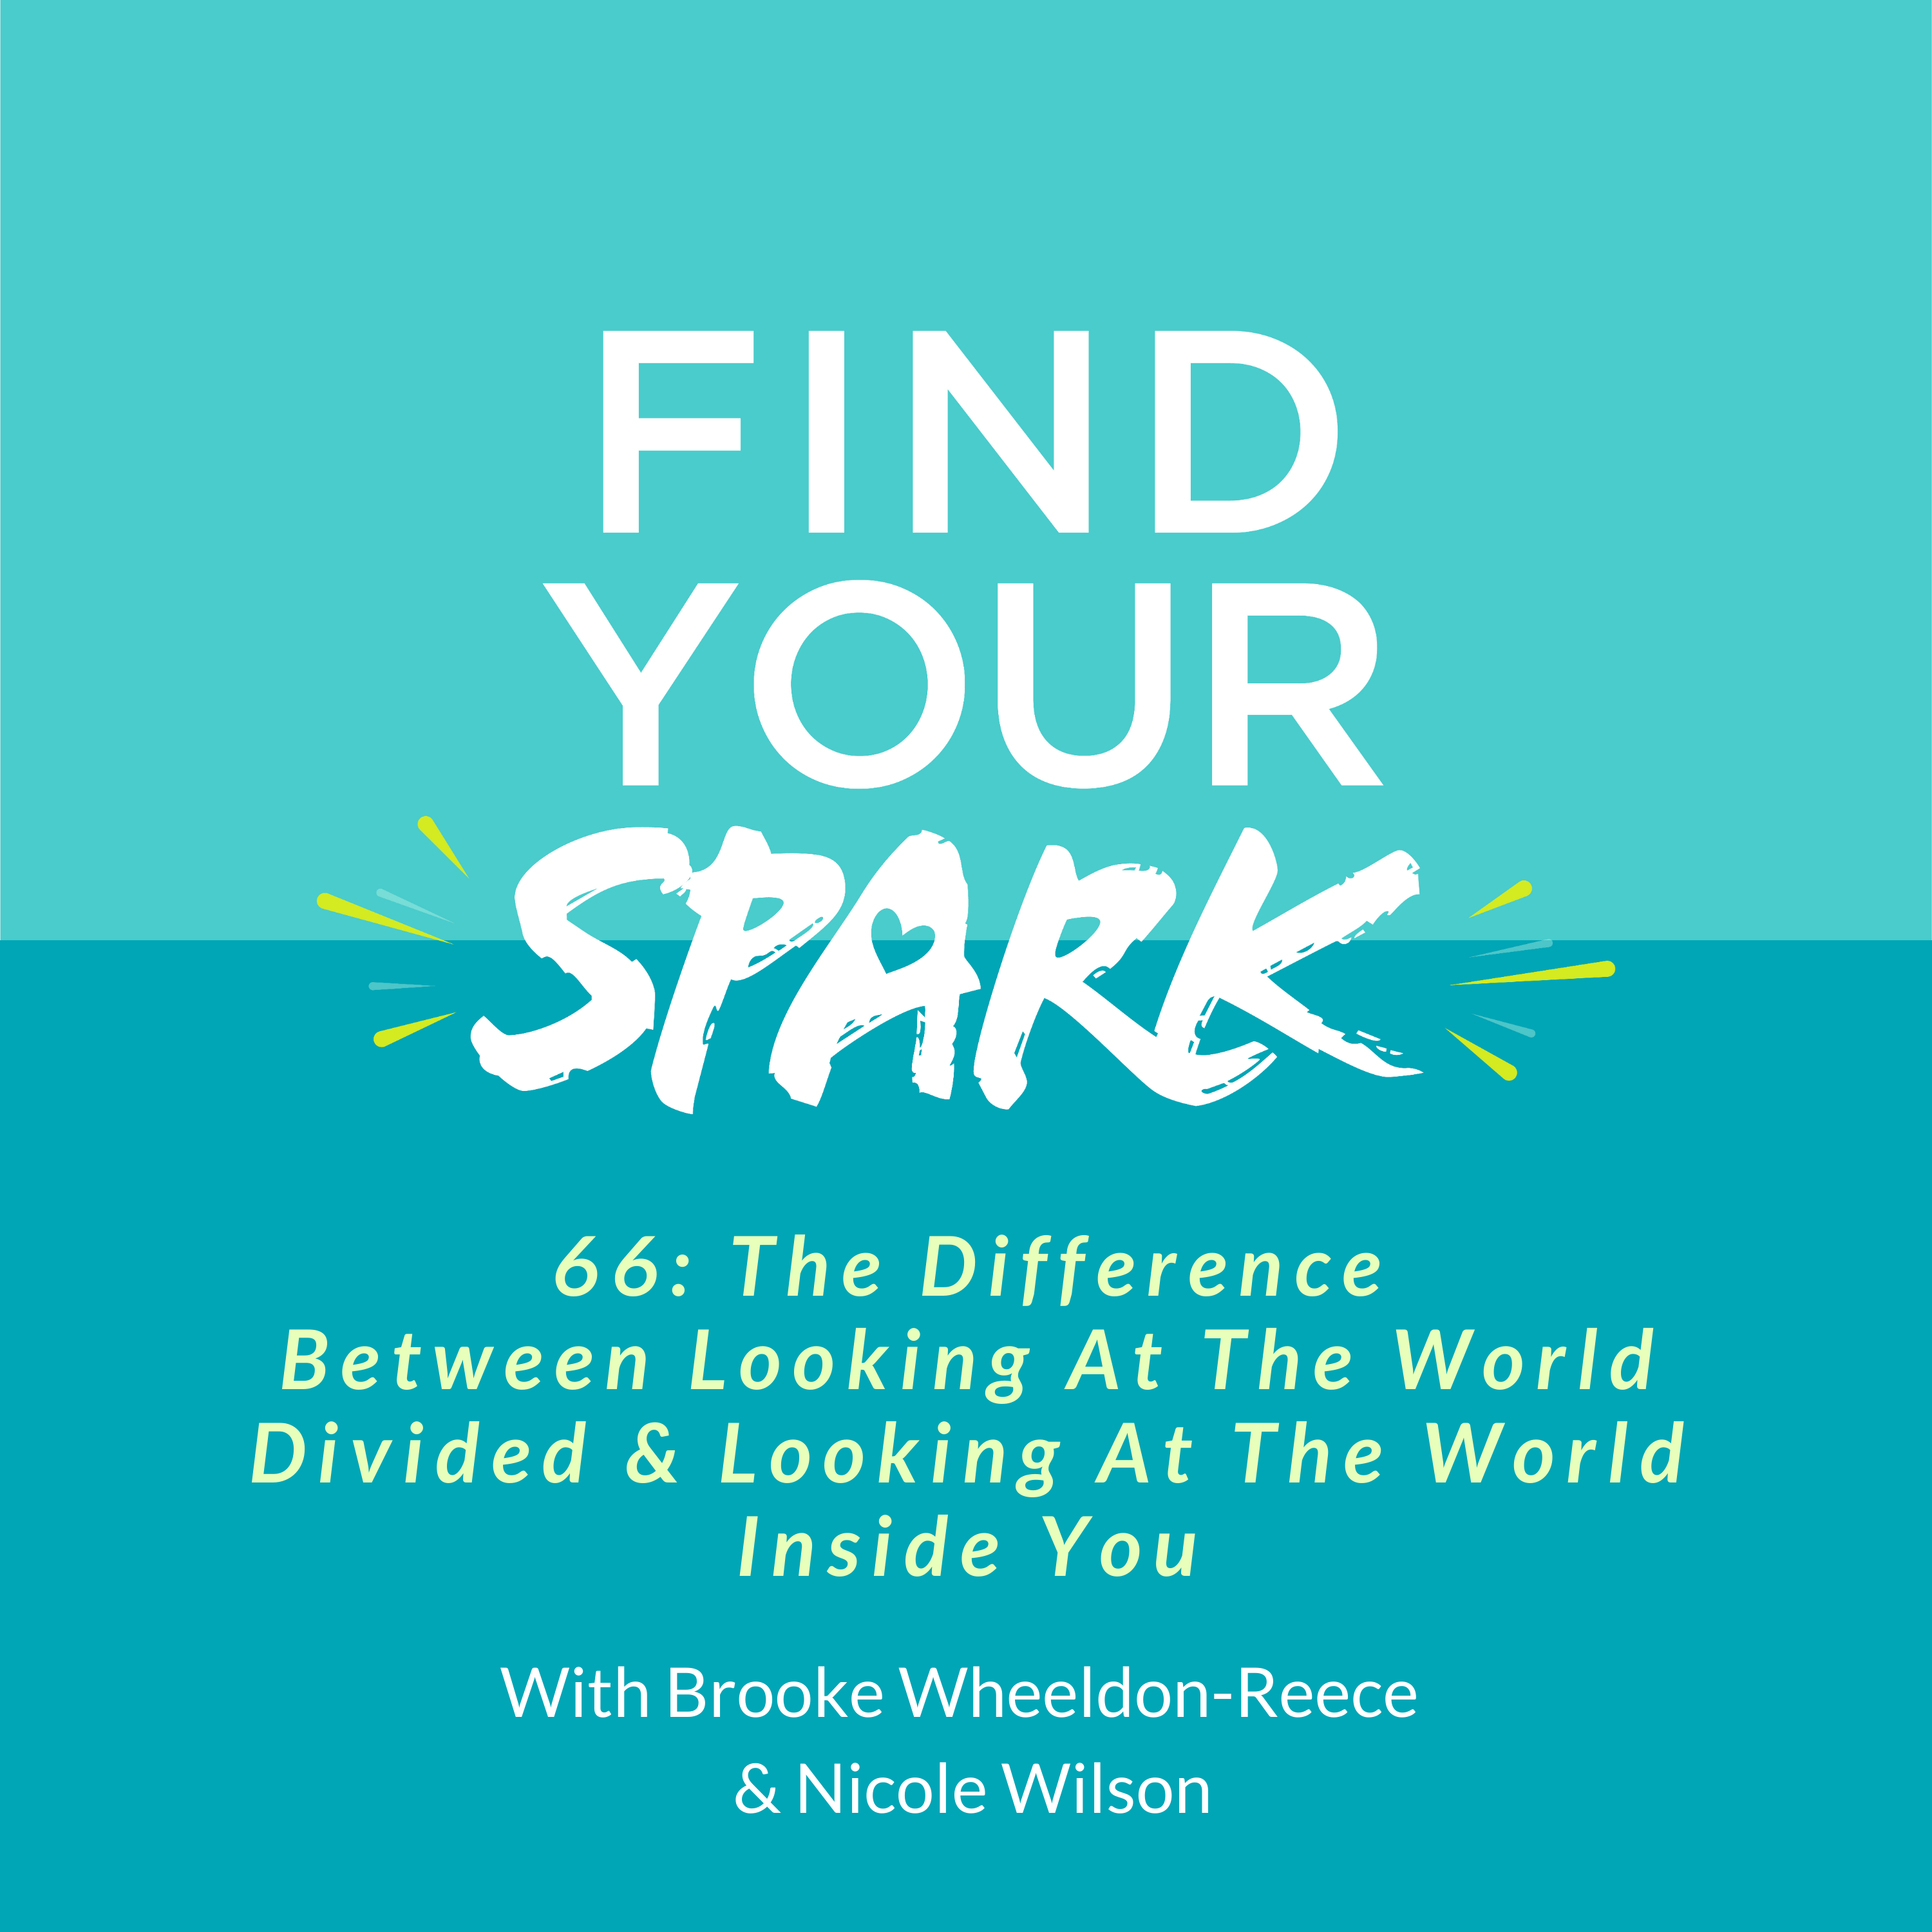 66:The Difference Between Looking At The World Divided & Looking At the World inside You